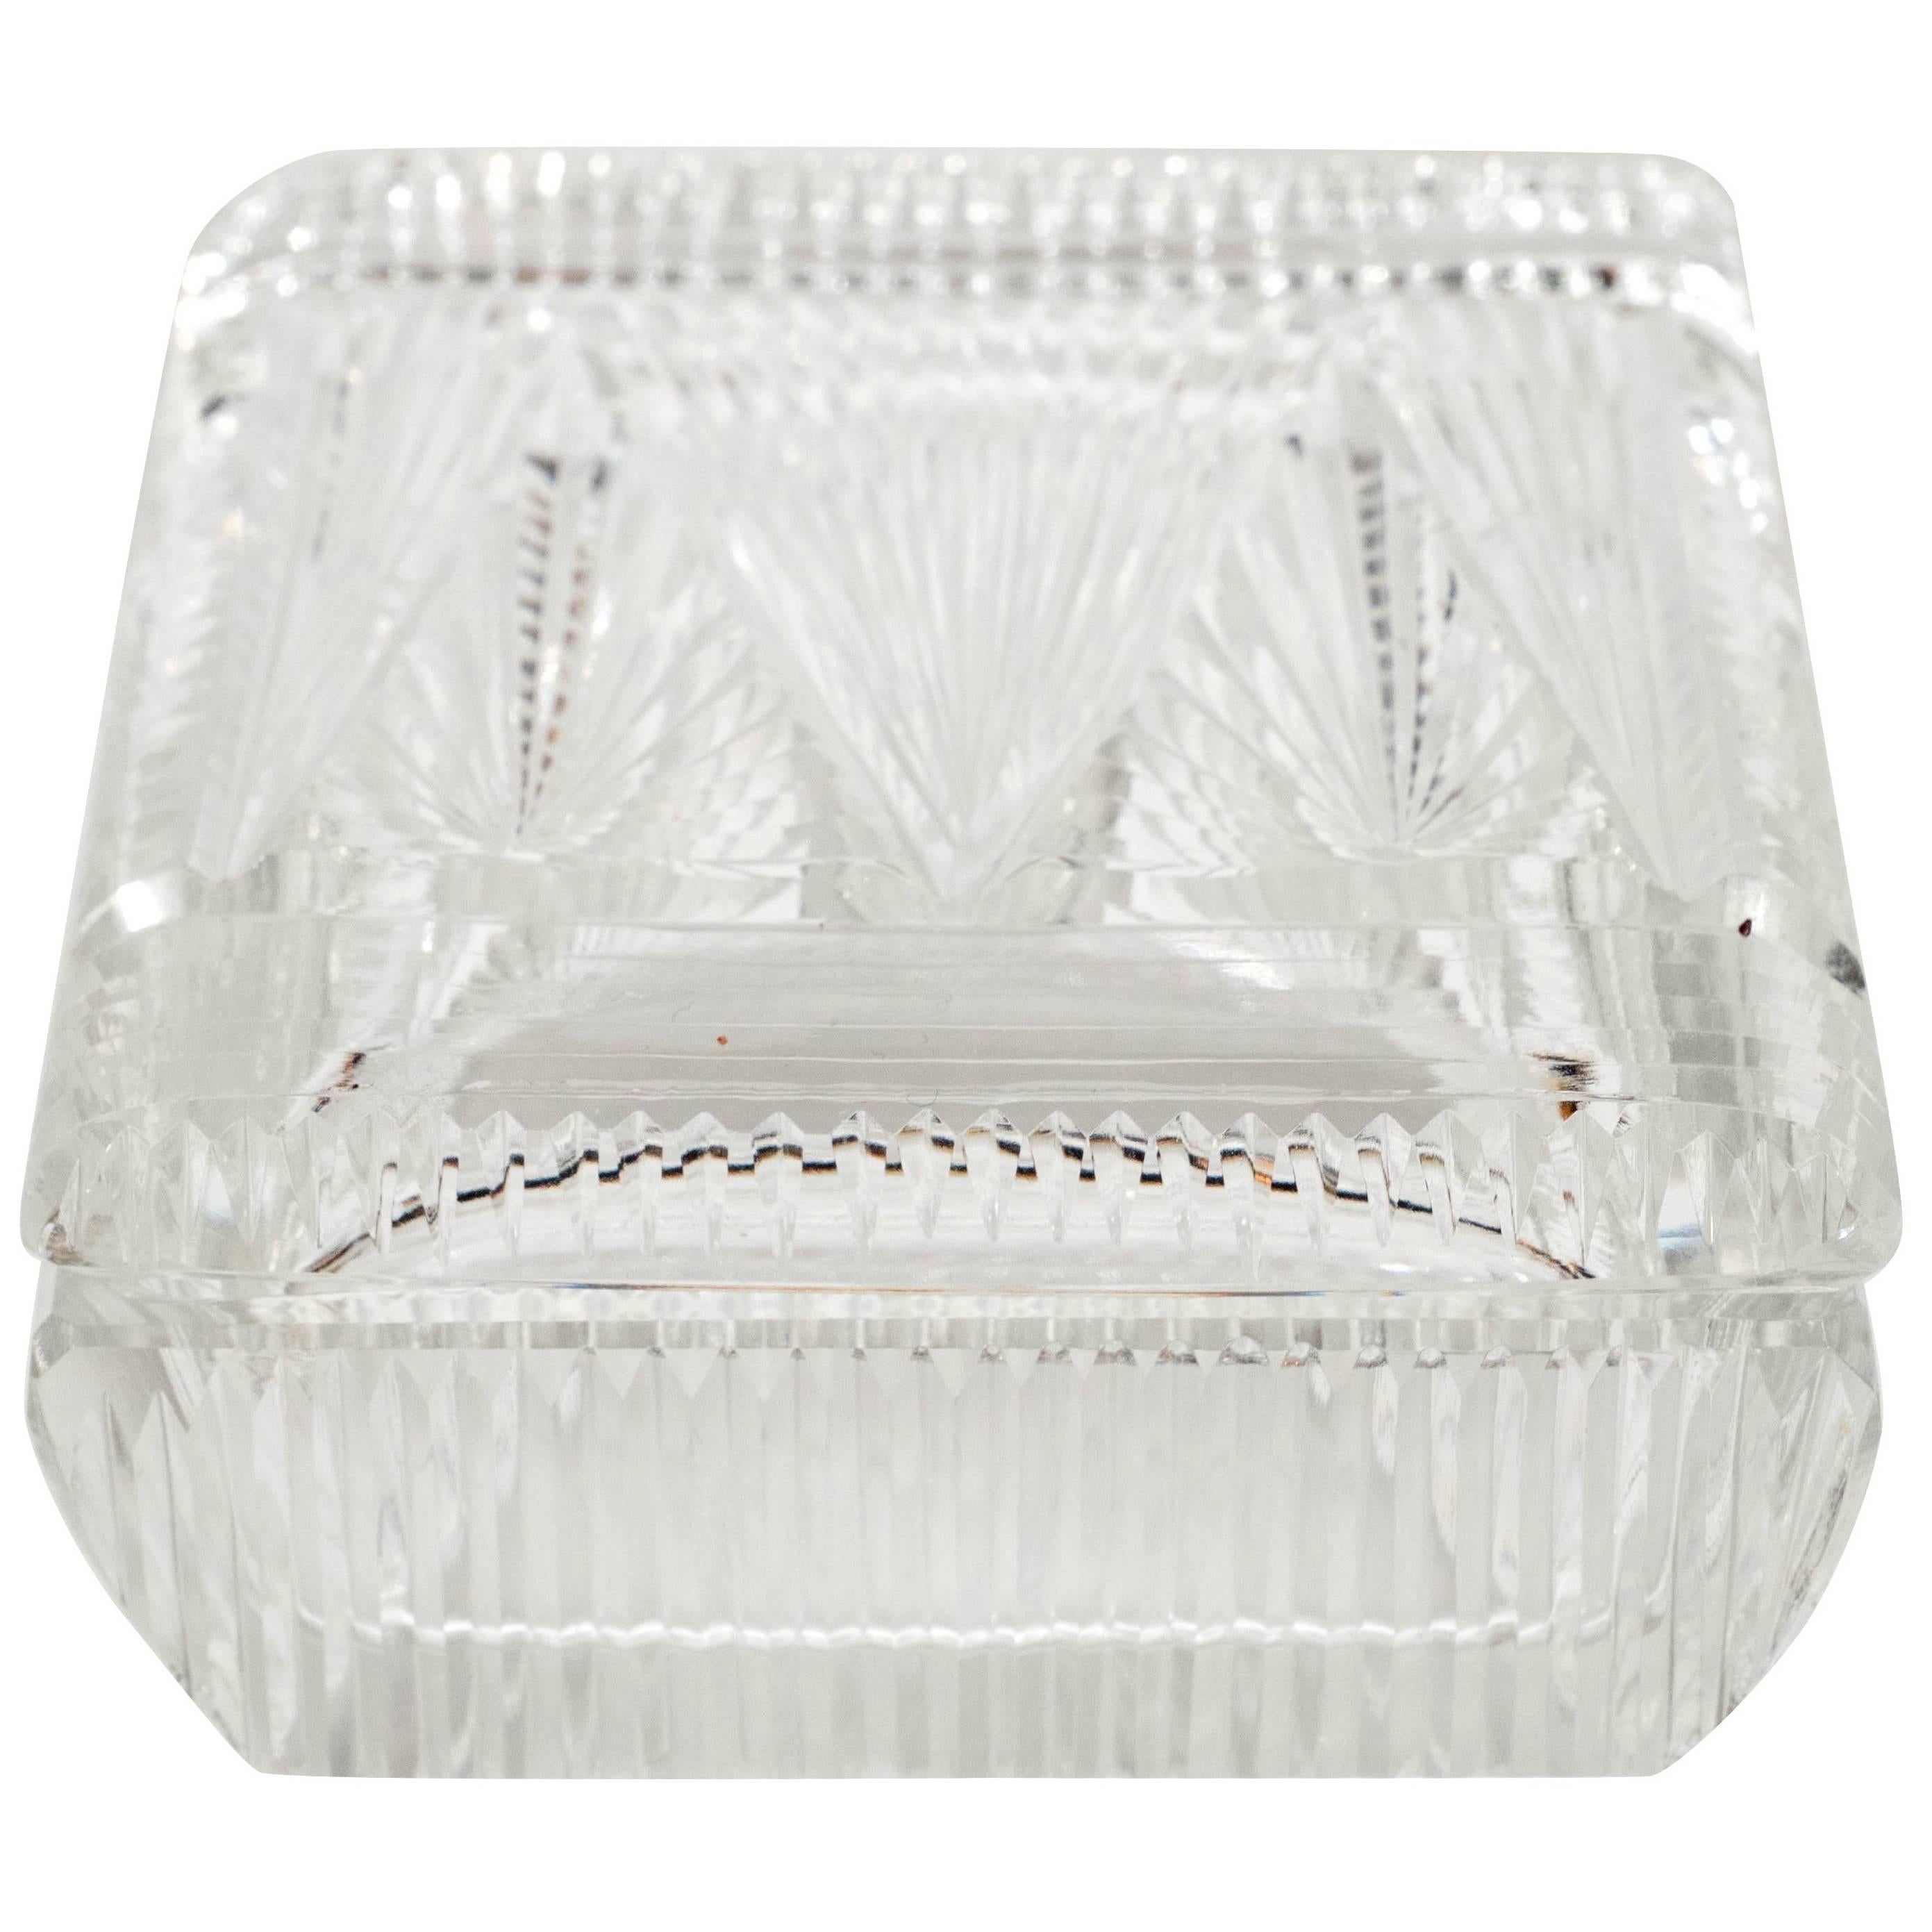 Art Deco Czech Skyscraper Style Clear Glass Box with Rectilinear Beveled Designs